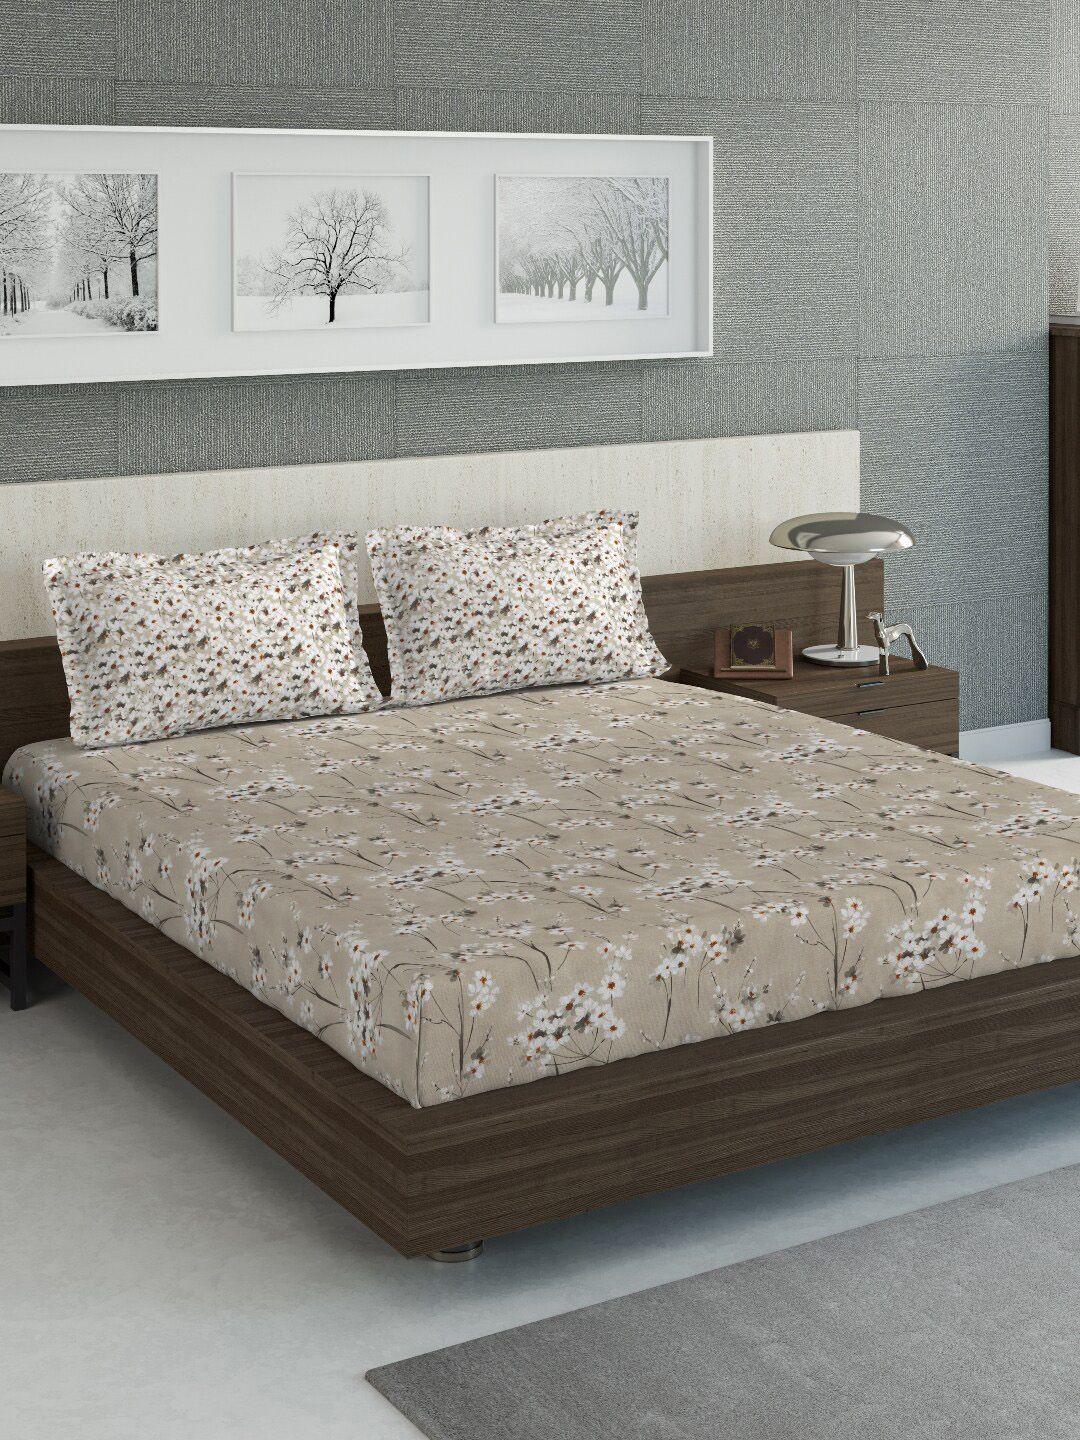 DDecor Beige & Off-White Floral Printed Double King Bed Cover With 2 Pillow Covers Price in India